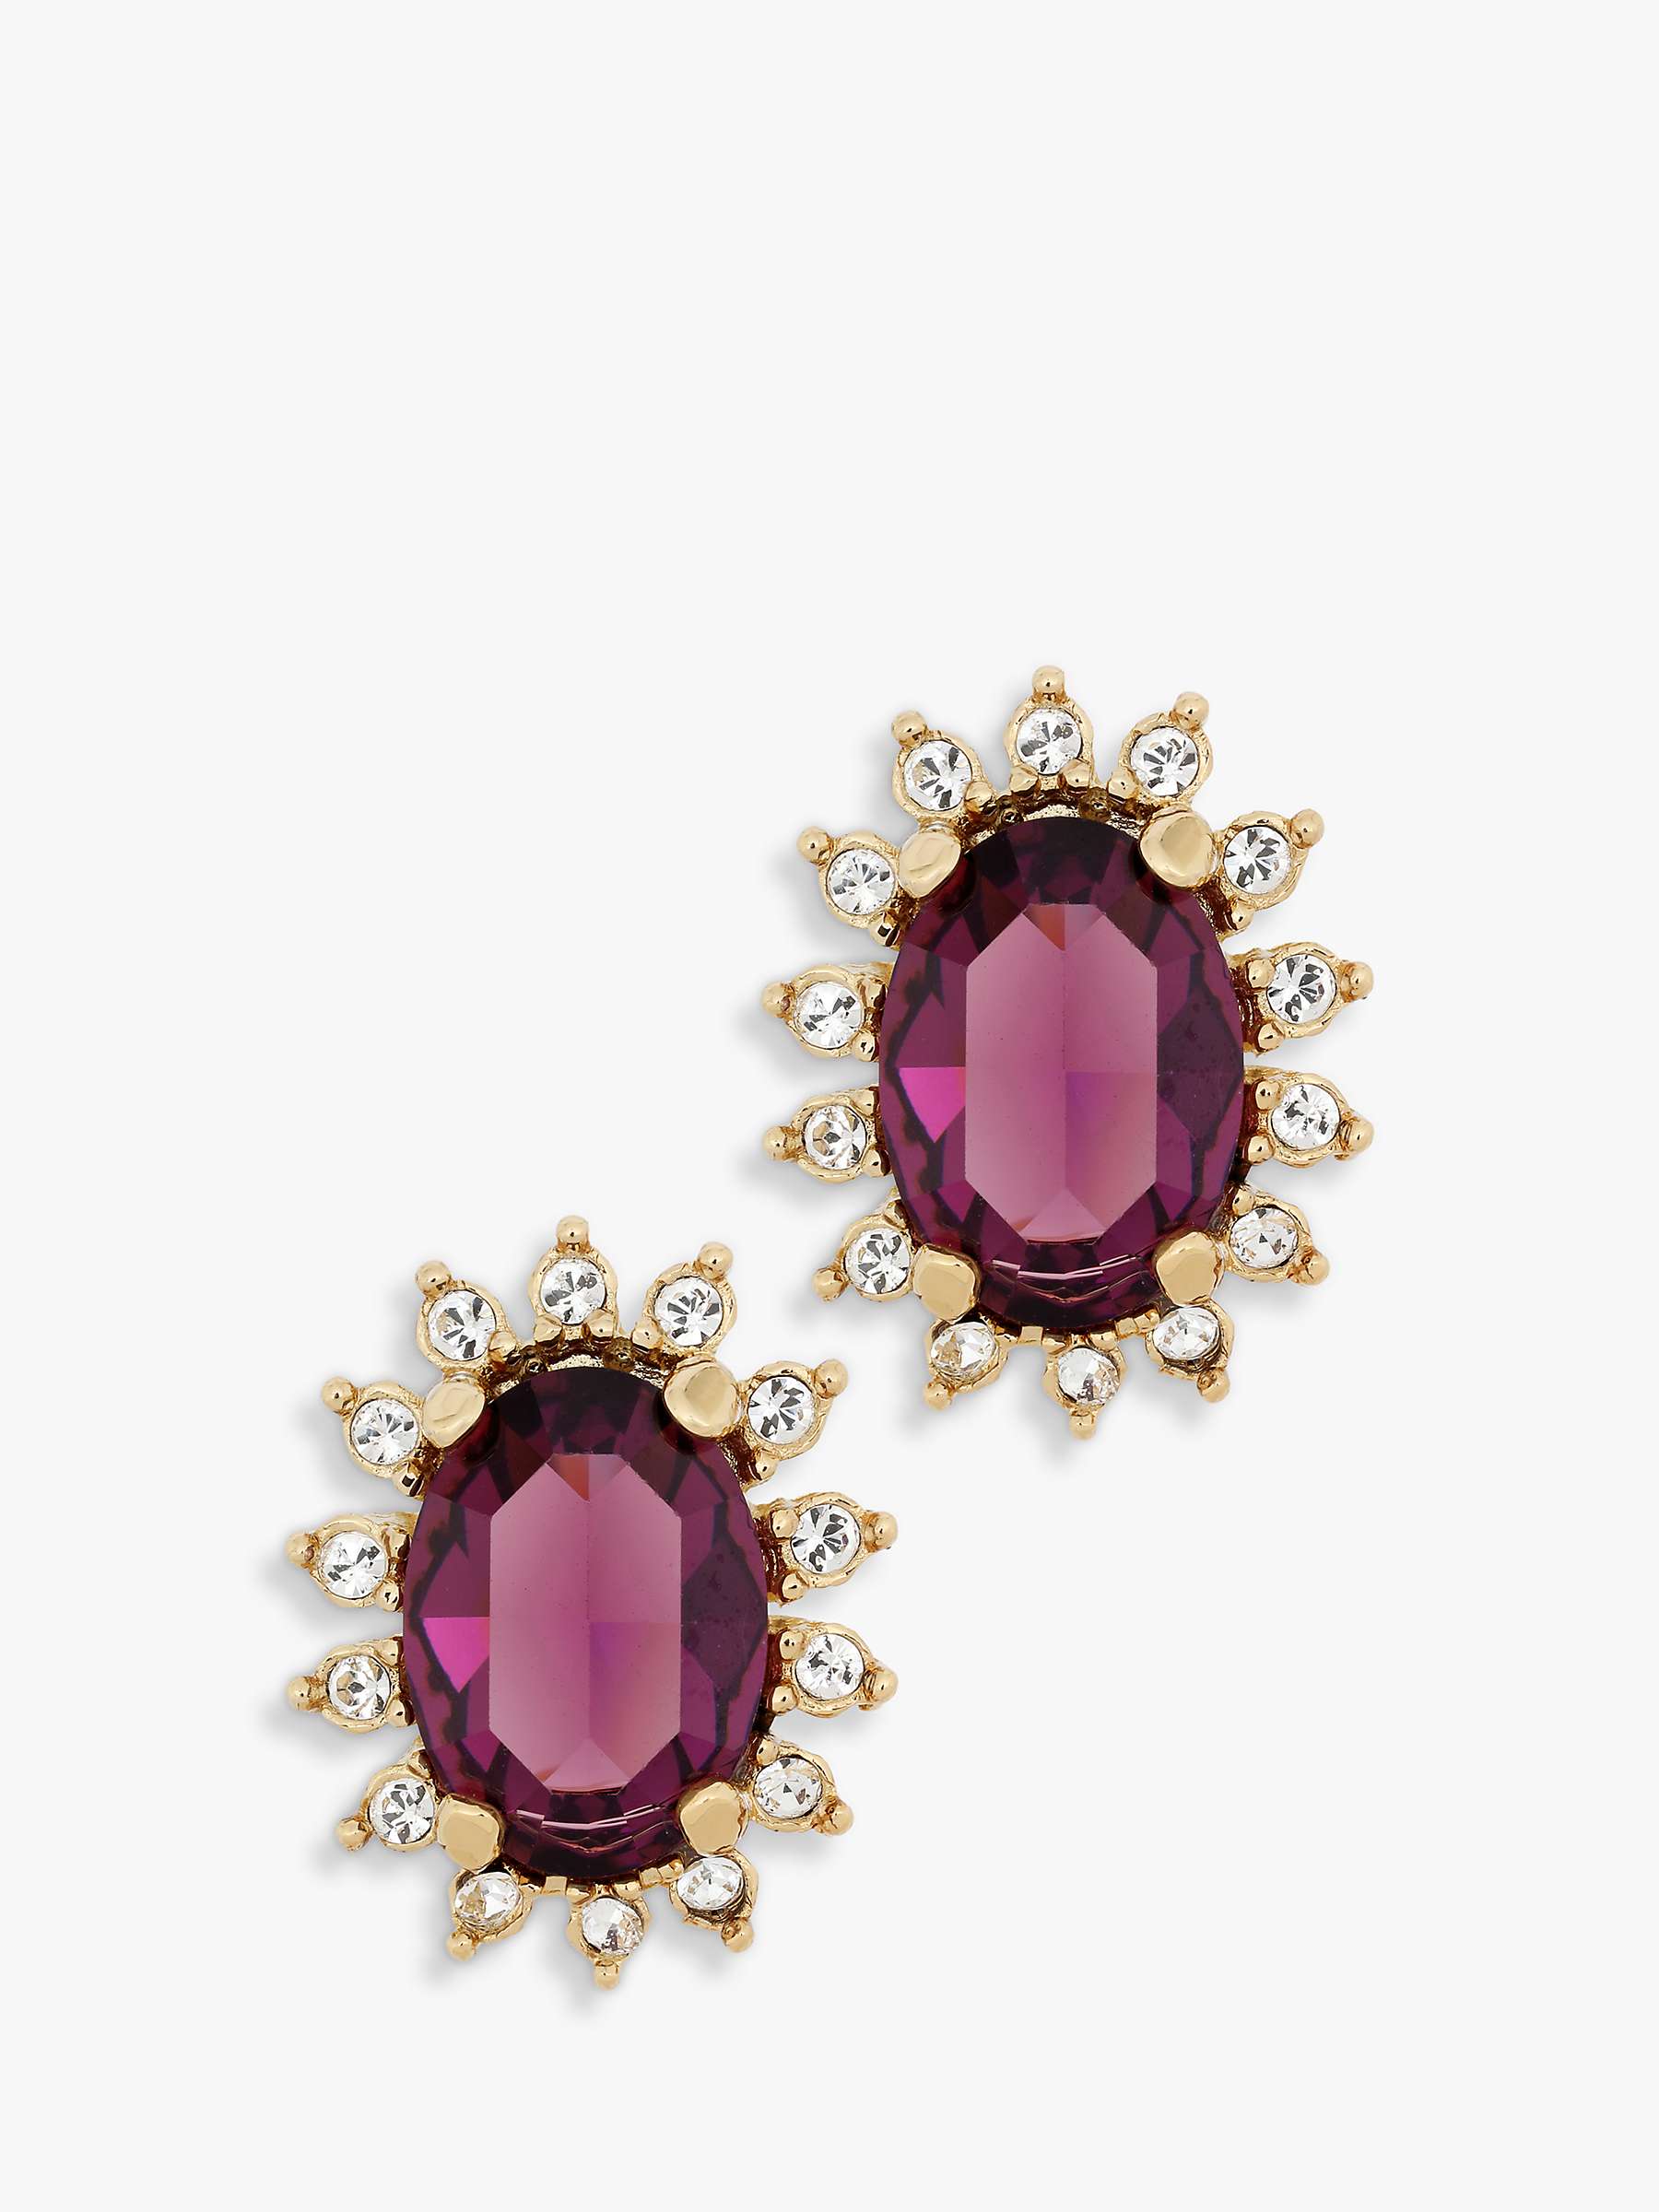 Buy Eclectica Vintage Oval Glass & Swarovski Crystal Clip-on Earrings, Dated Circa 1980s, Gold/Purple Online at johnlewis.com